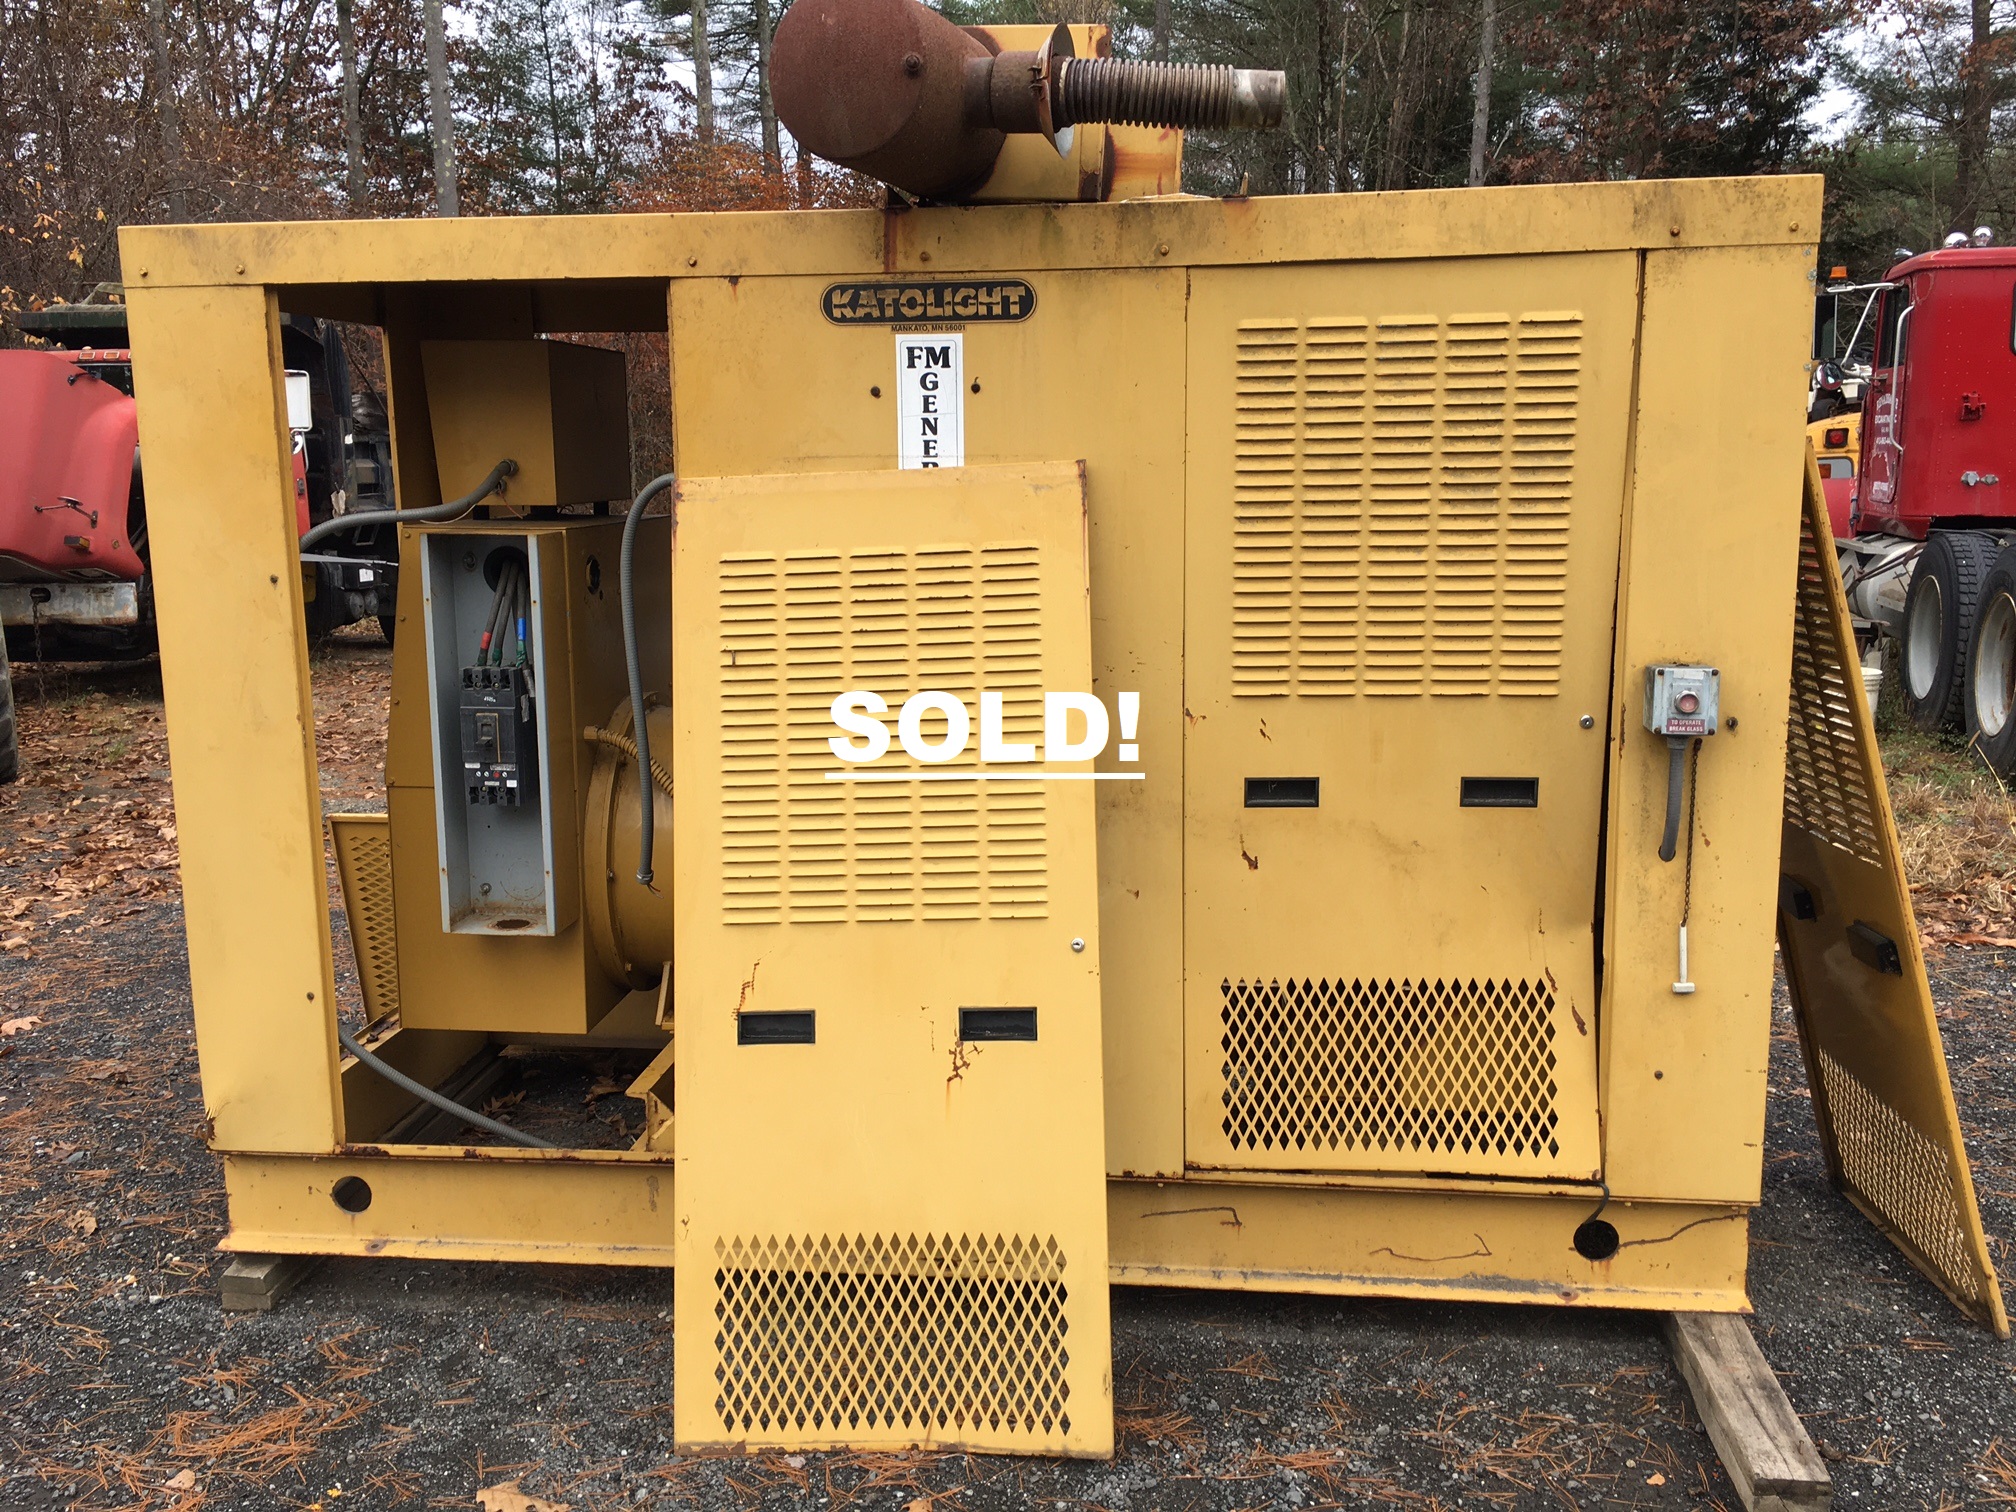 Katolight Genset Generator. Not currently running. Will need some work. The motor is a International DD466 turbo diesel with 210 hp. 278 metered hours. 125 kw. Will need to be all hooked up, maybe about 15 hours to hook and remount the motor and get it all running.